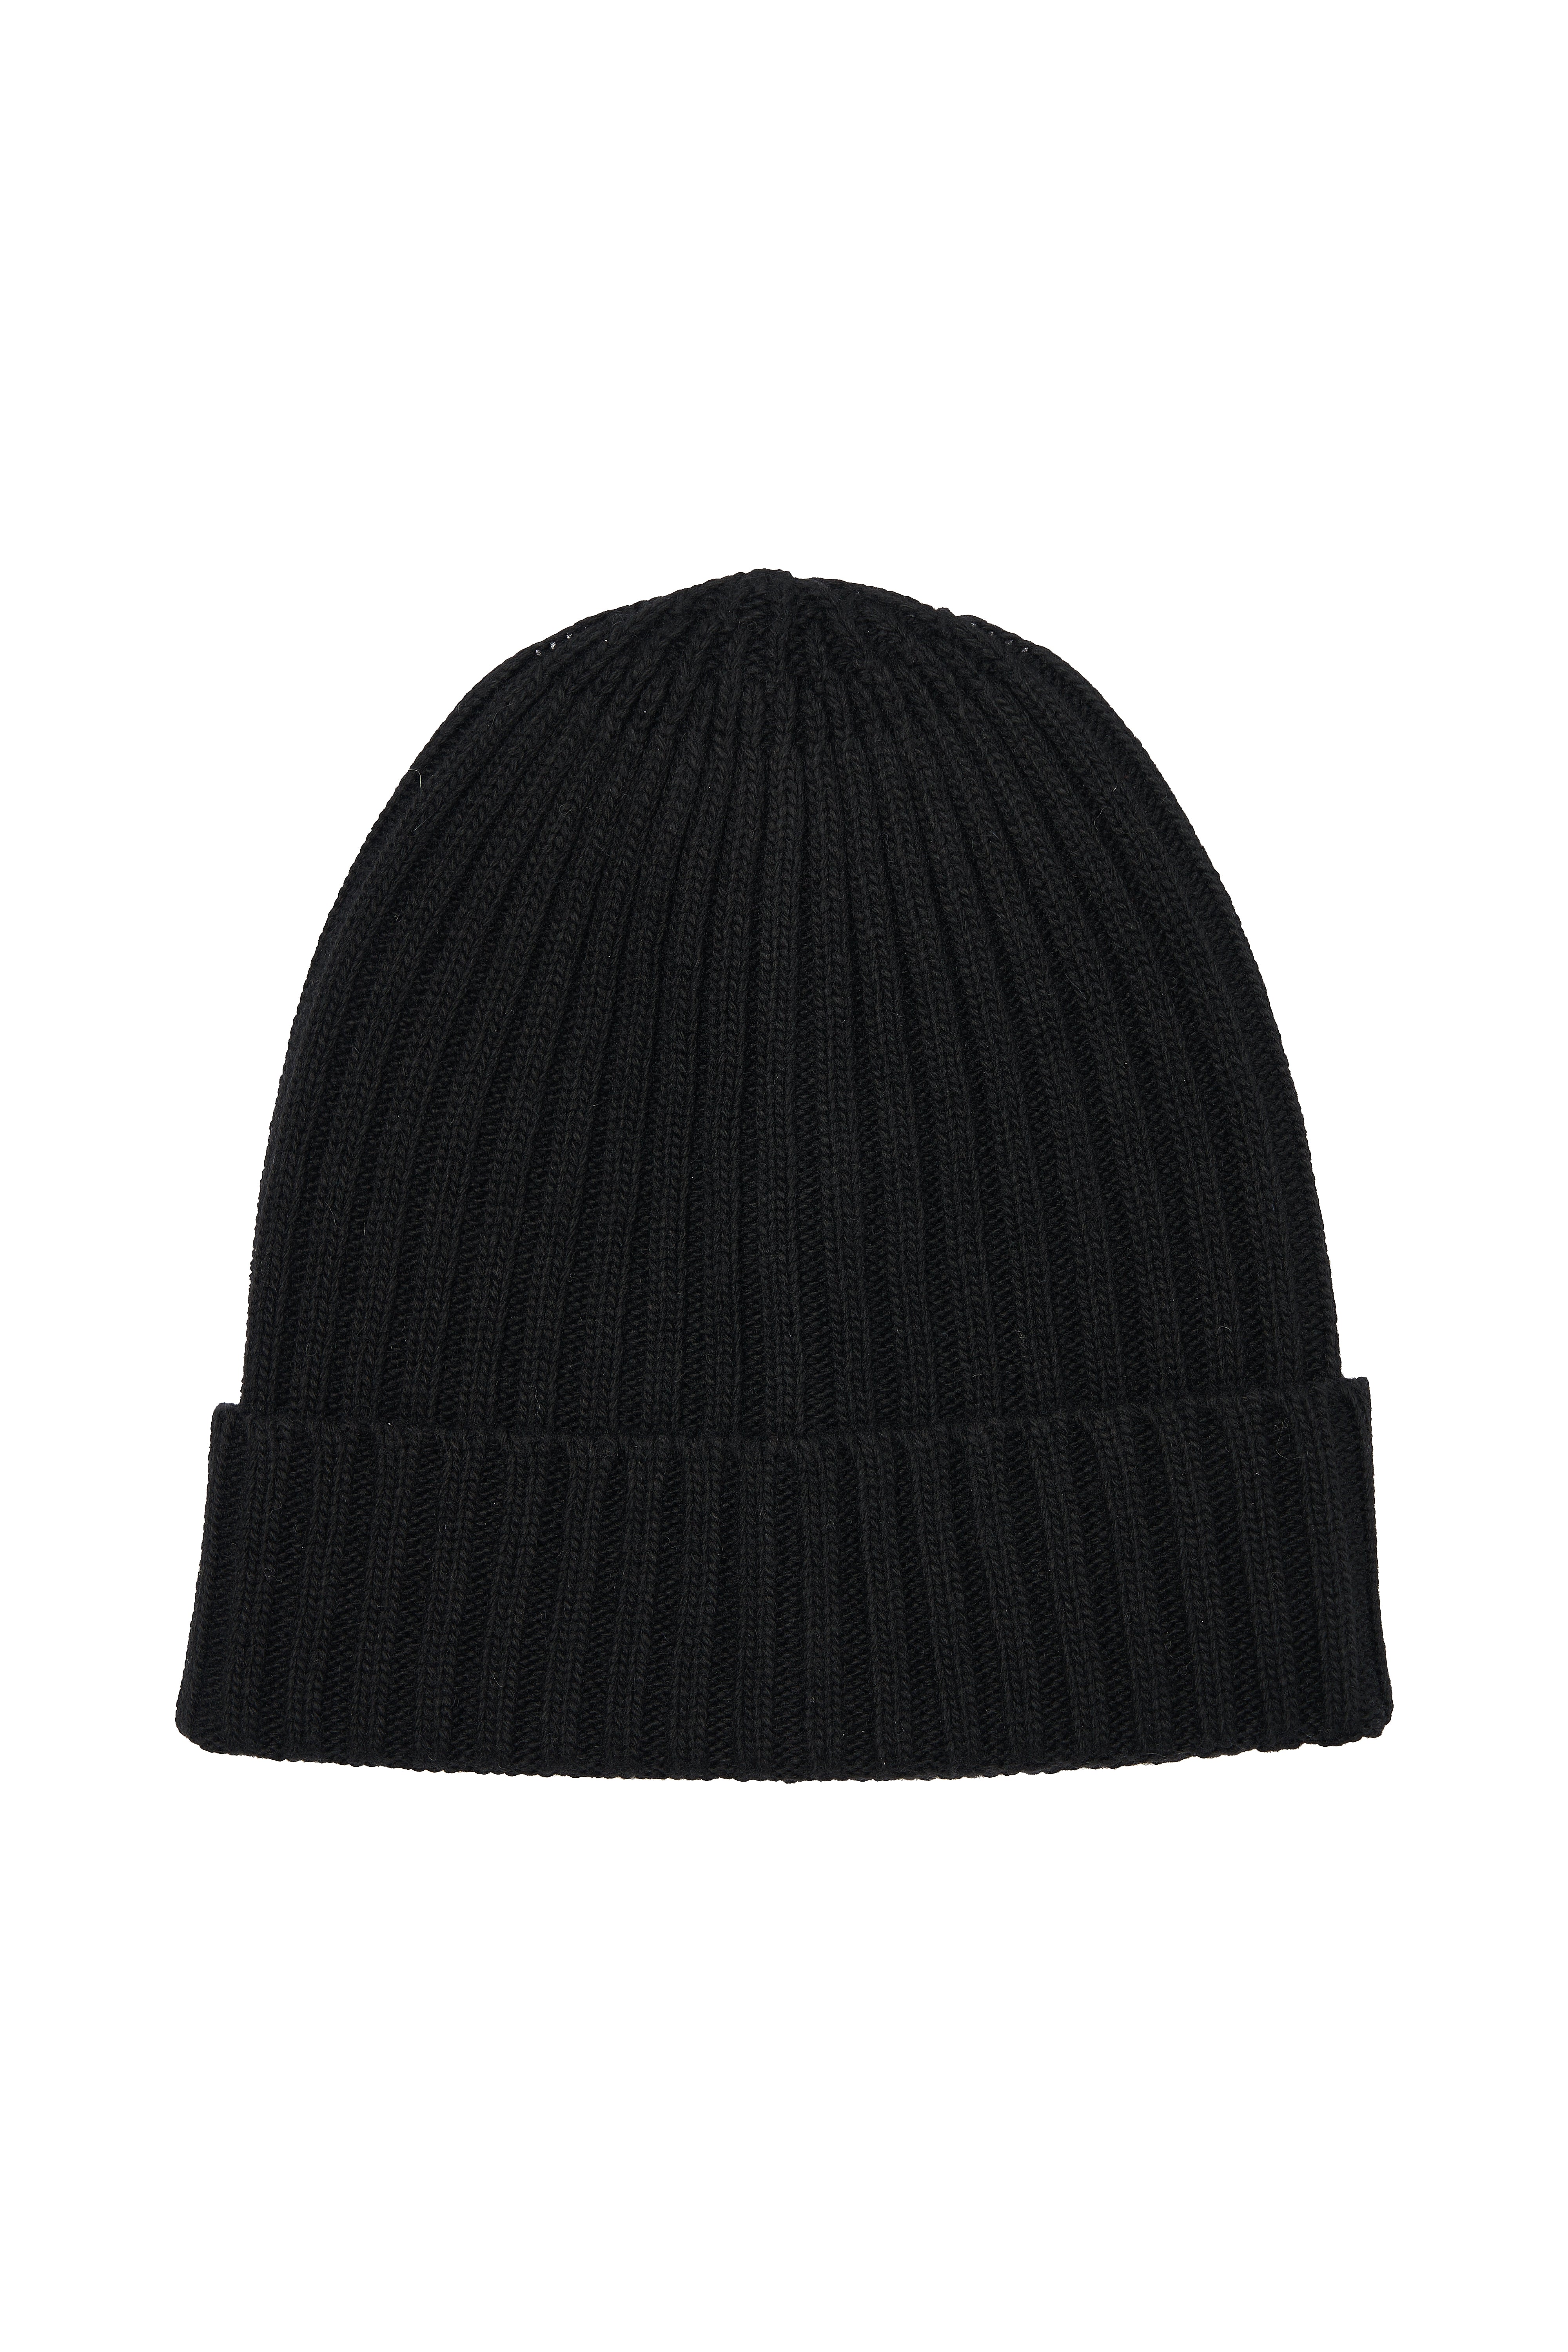 KNITTED BLACK CAP WITH CASHMERE